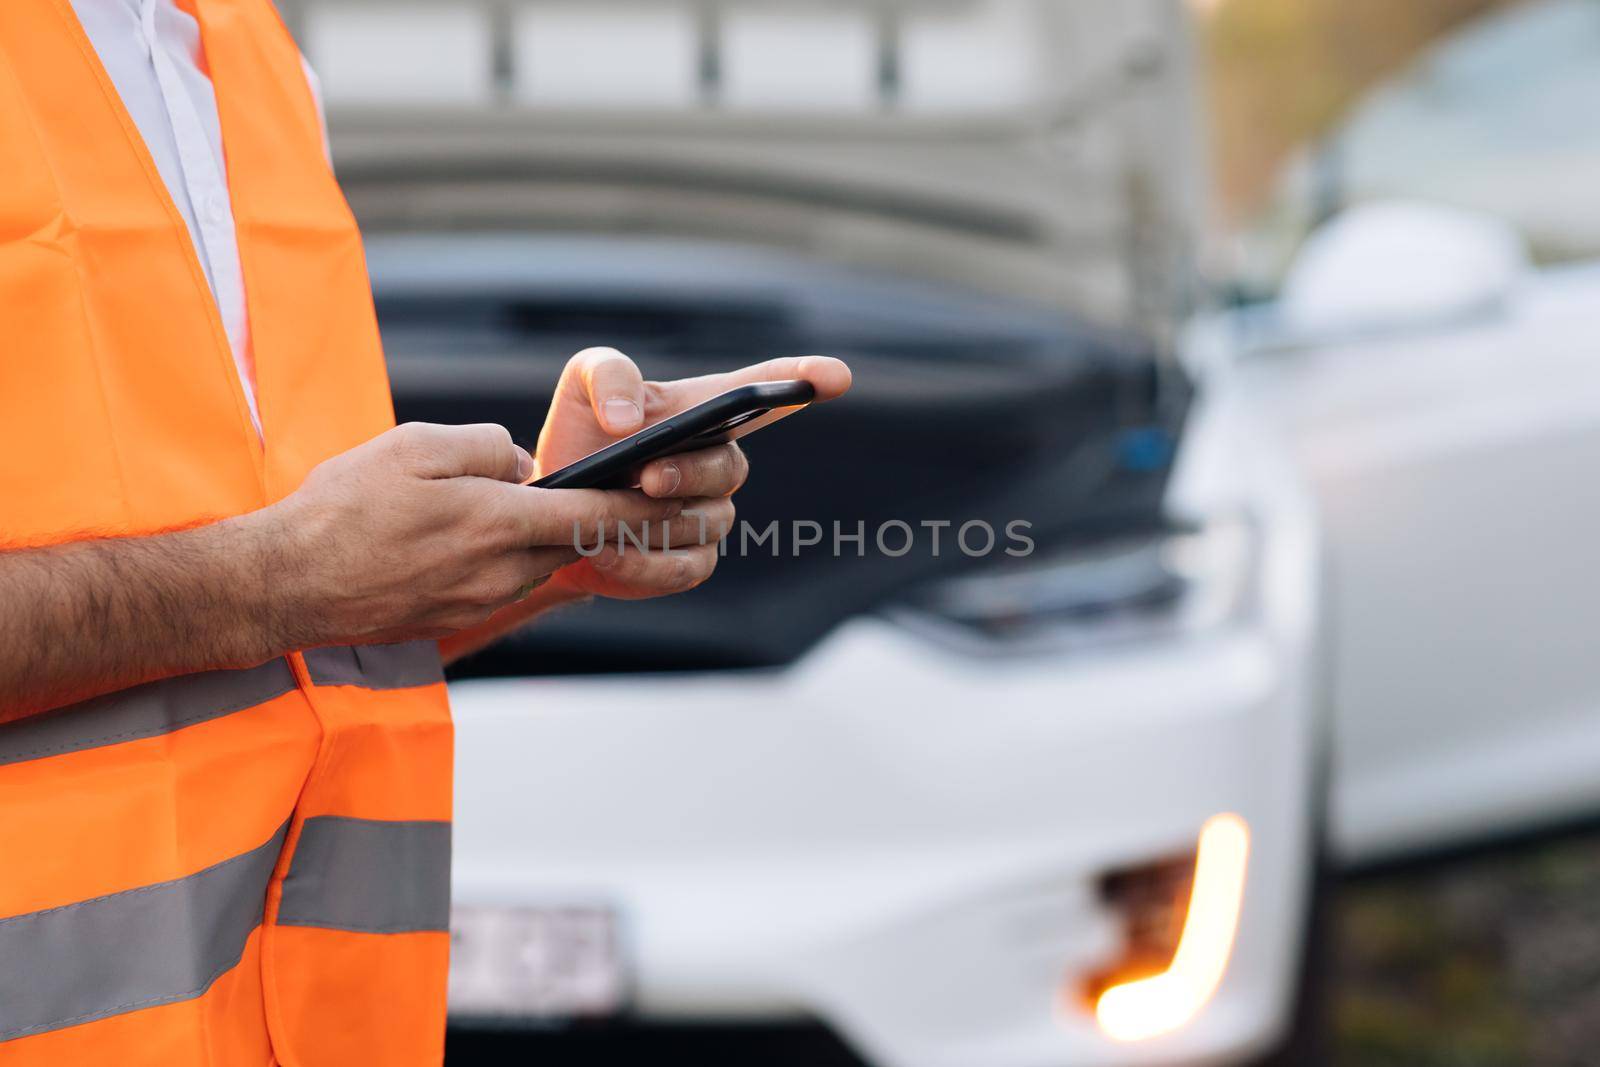 The man uses the phone after the electric car has broken down. Car Blinker Light or Emergency Light. The electric car had an accident. Car service.